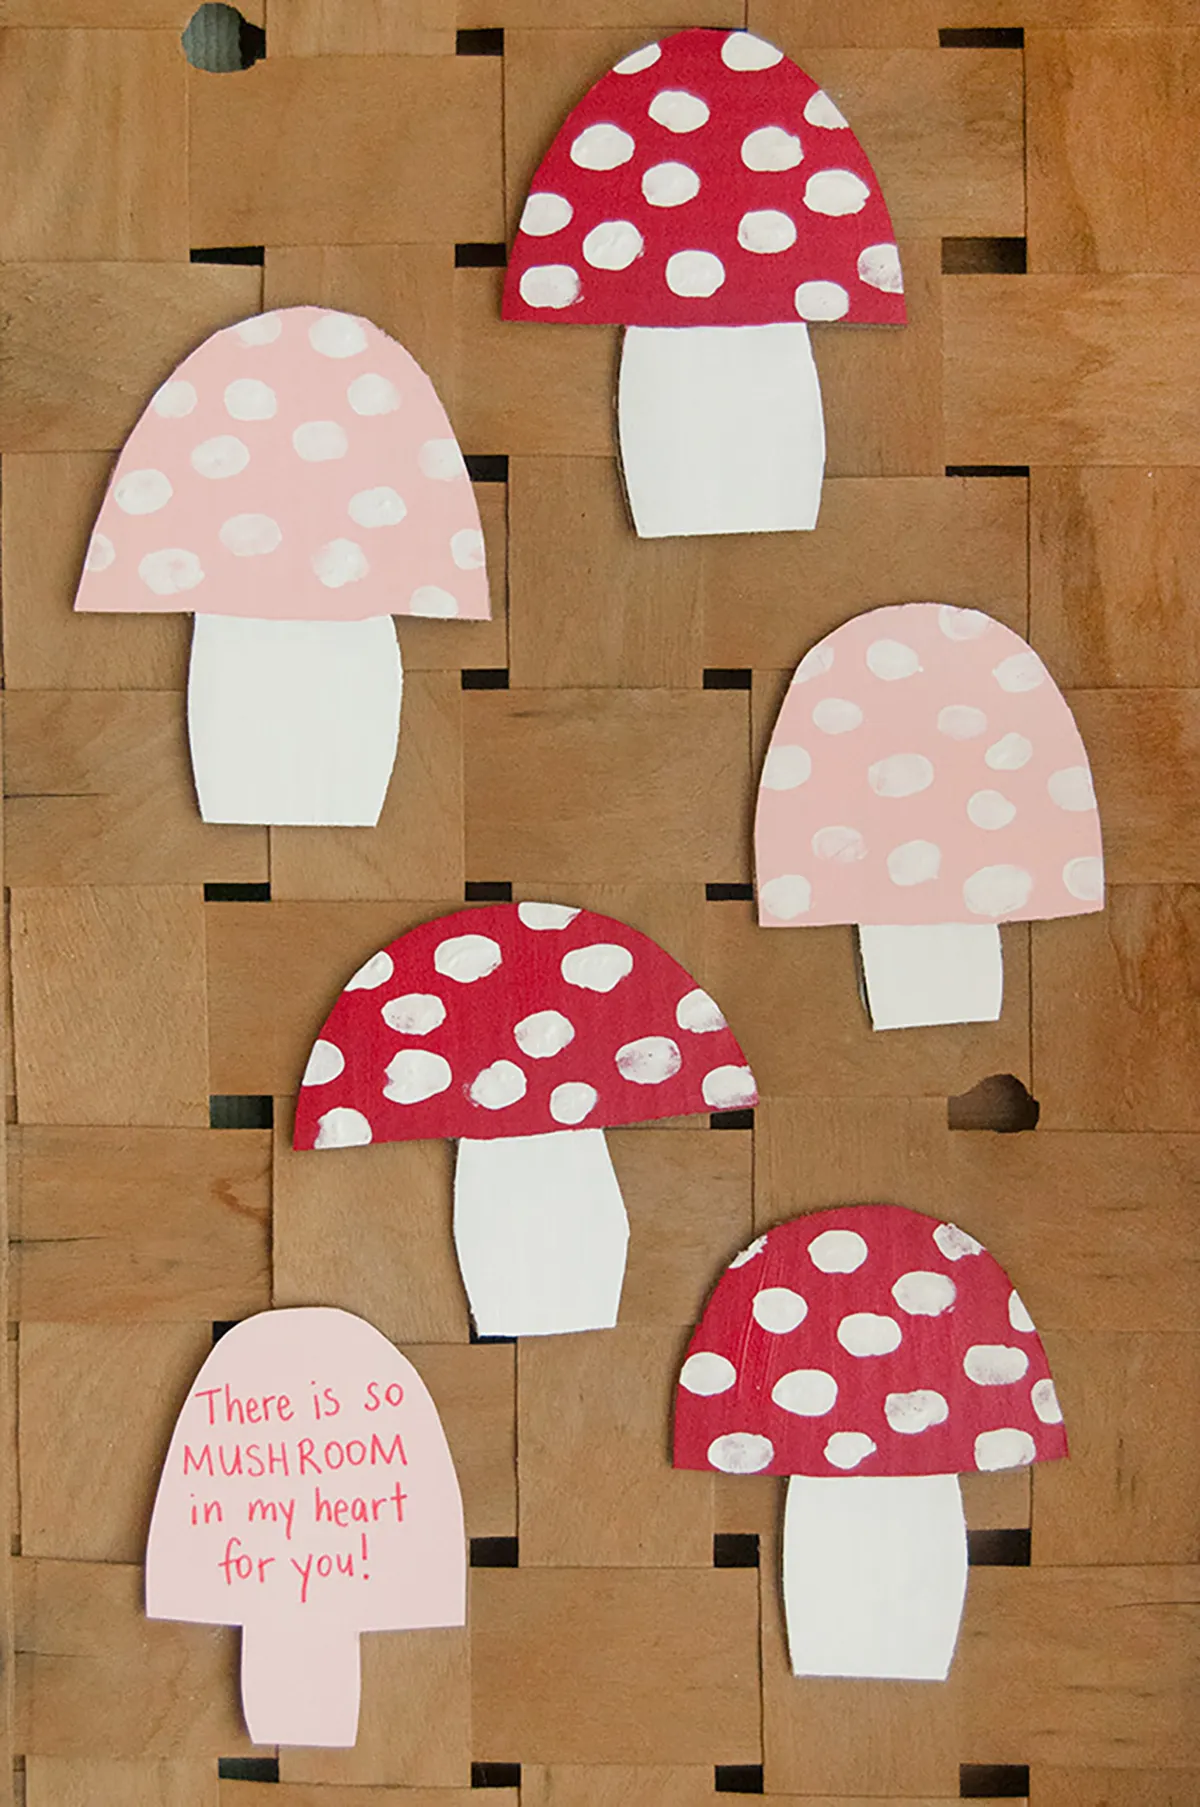 Mushroom cards with finger painting - valentines crafts for kids